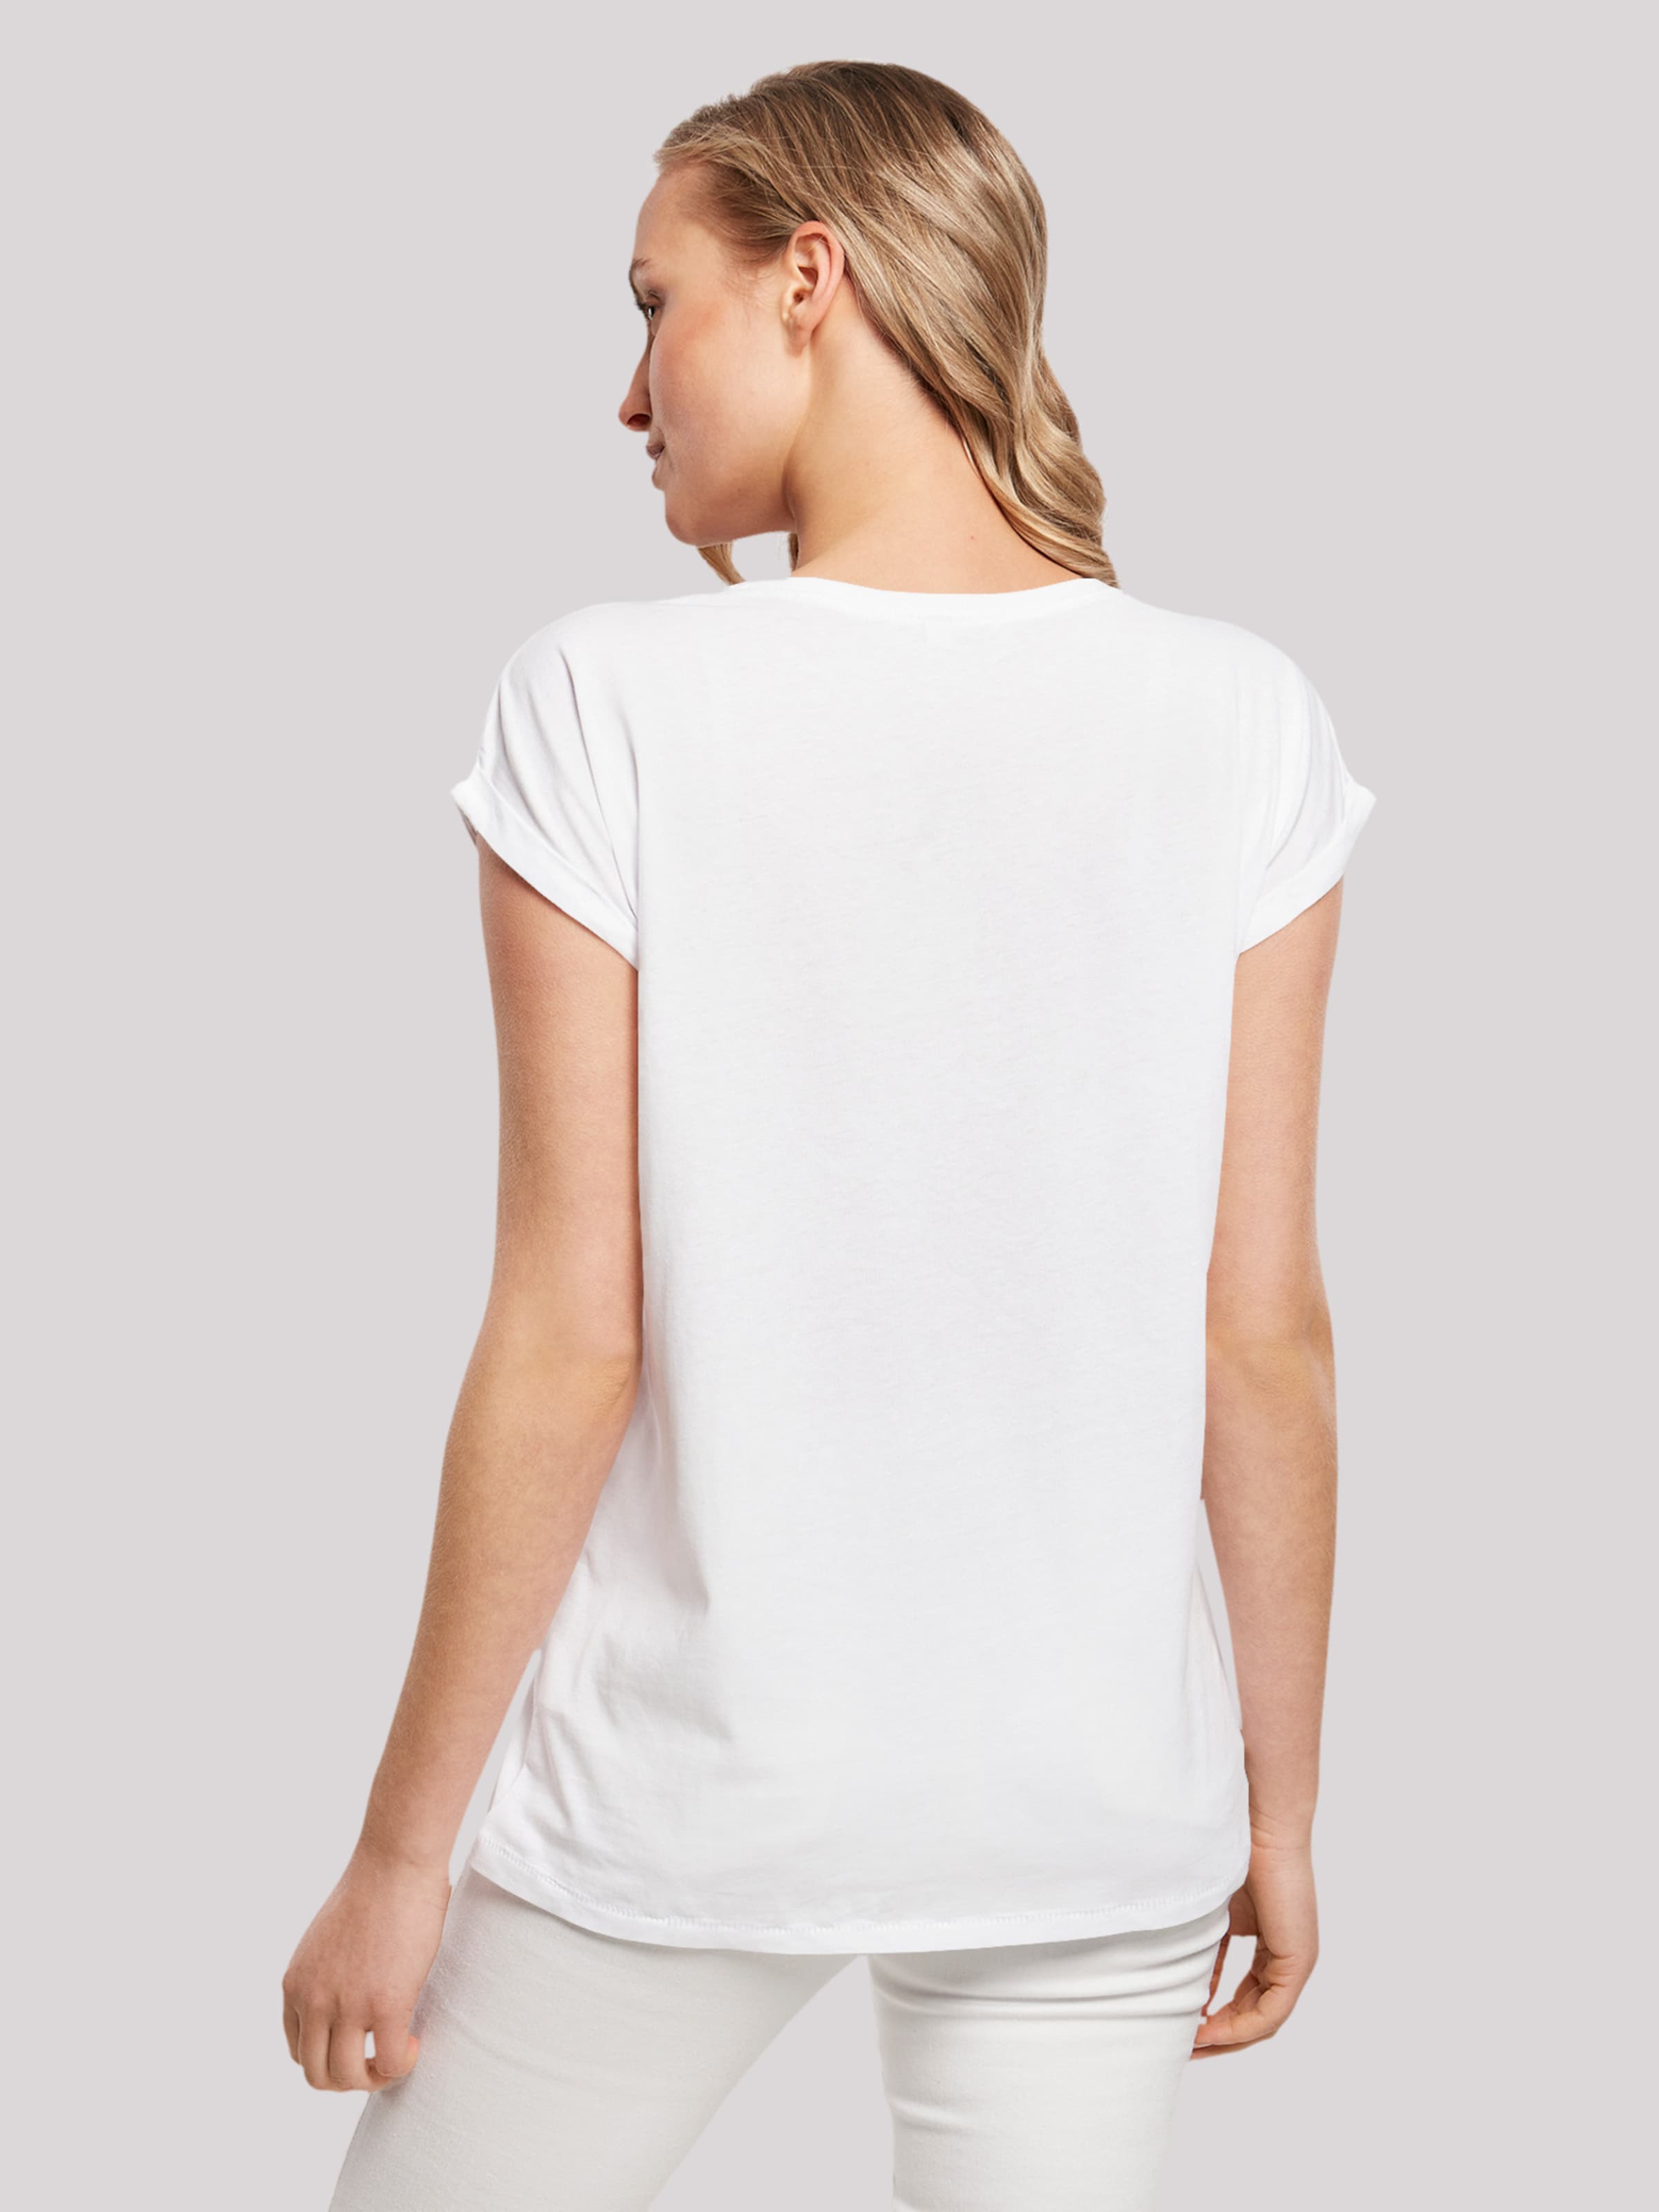 F4NT4STIC Shirt 'Robbe Knut & Jan Hamburg' in White | ABOUT YOU